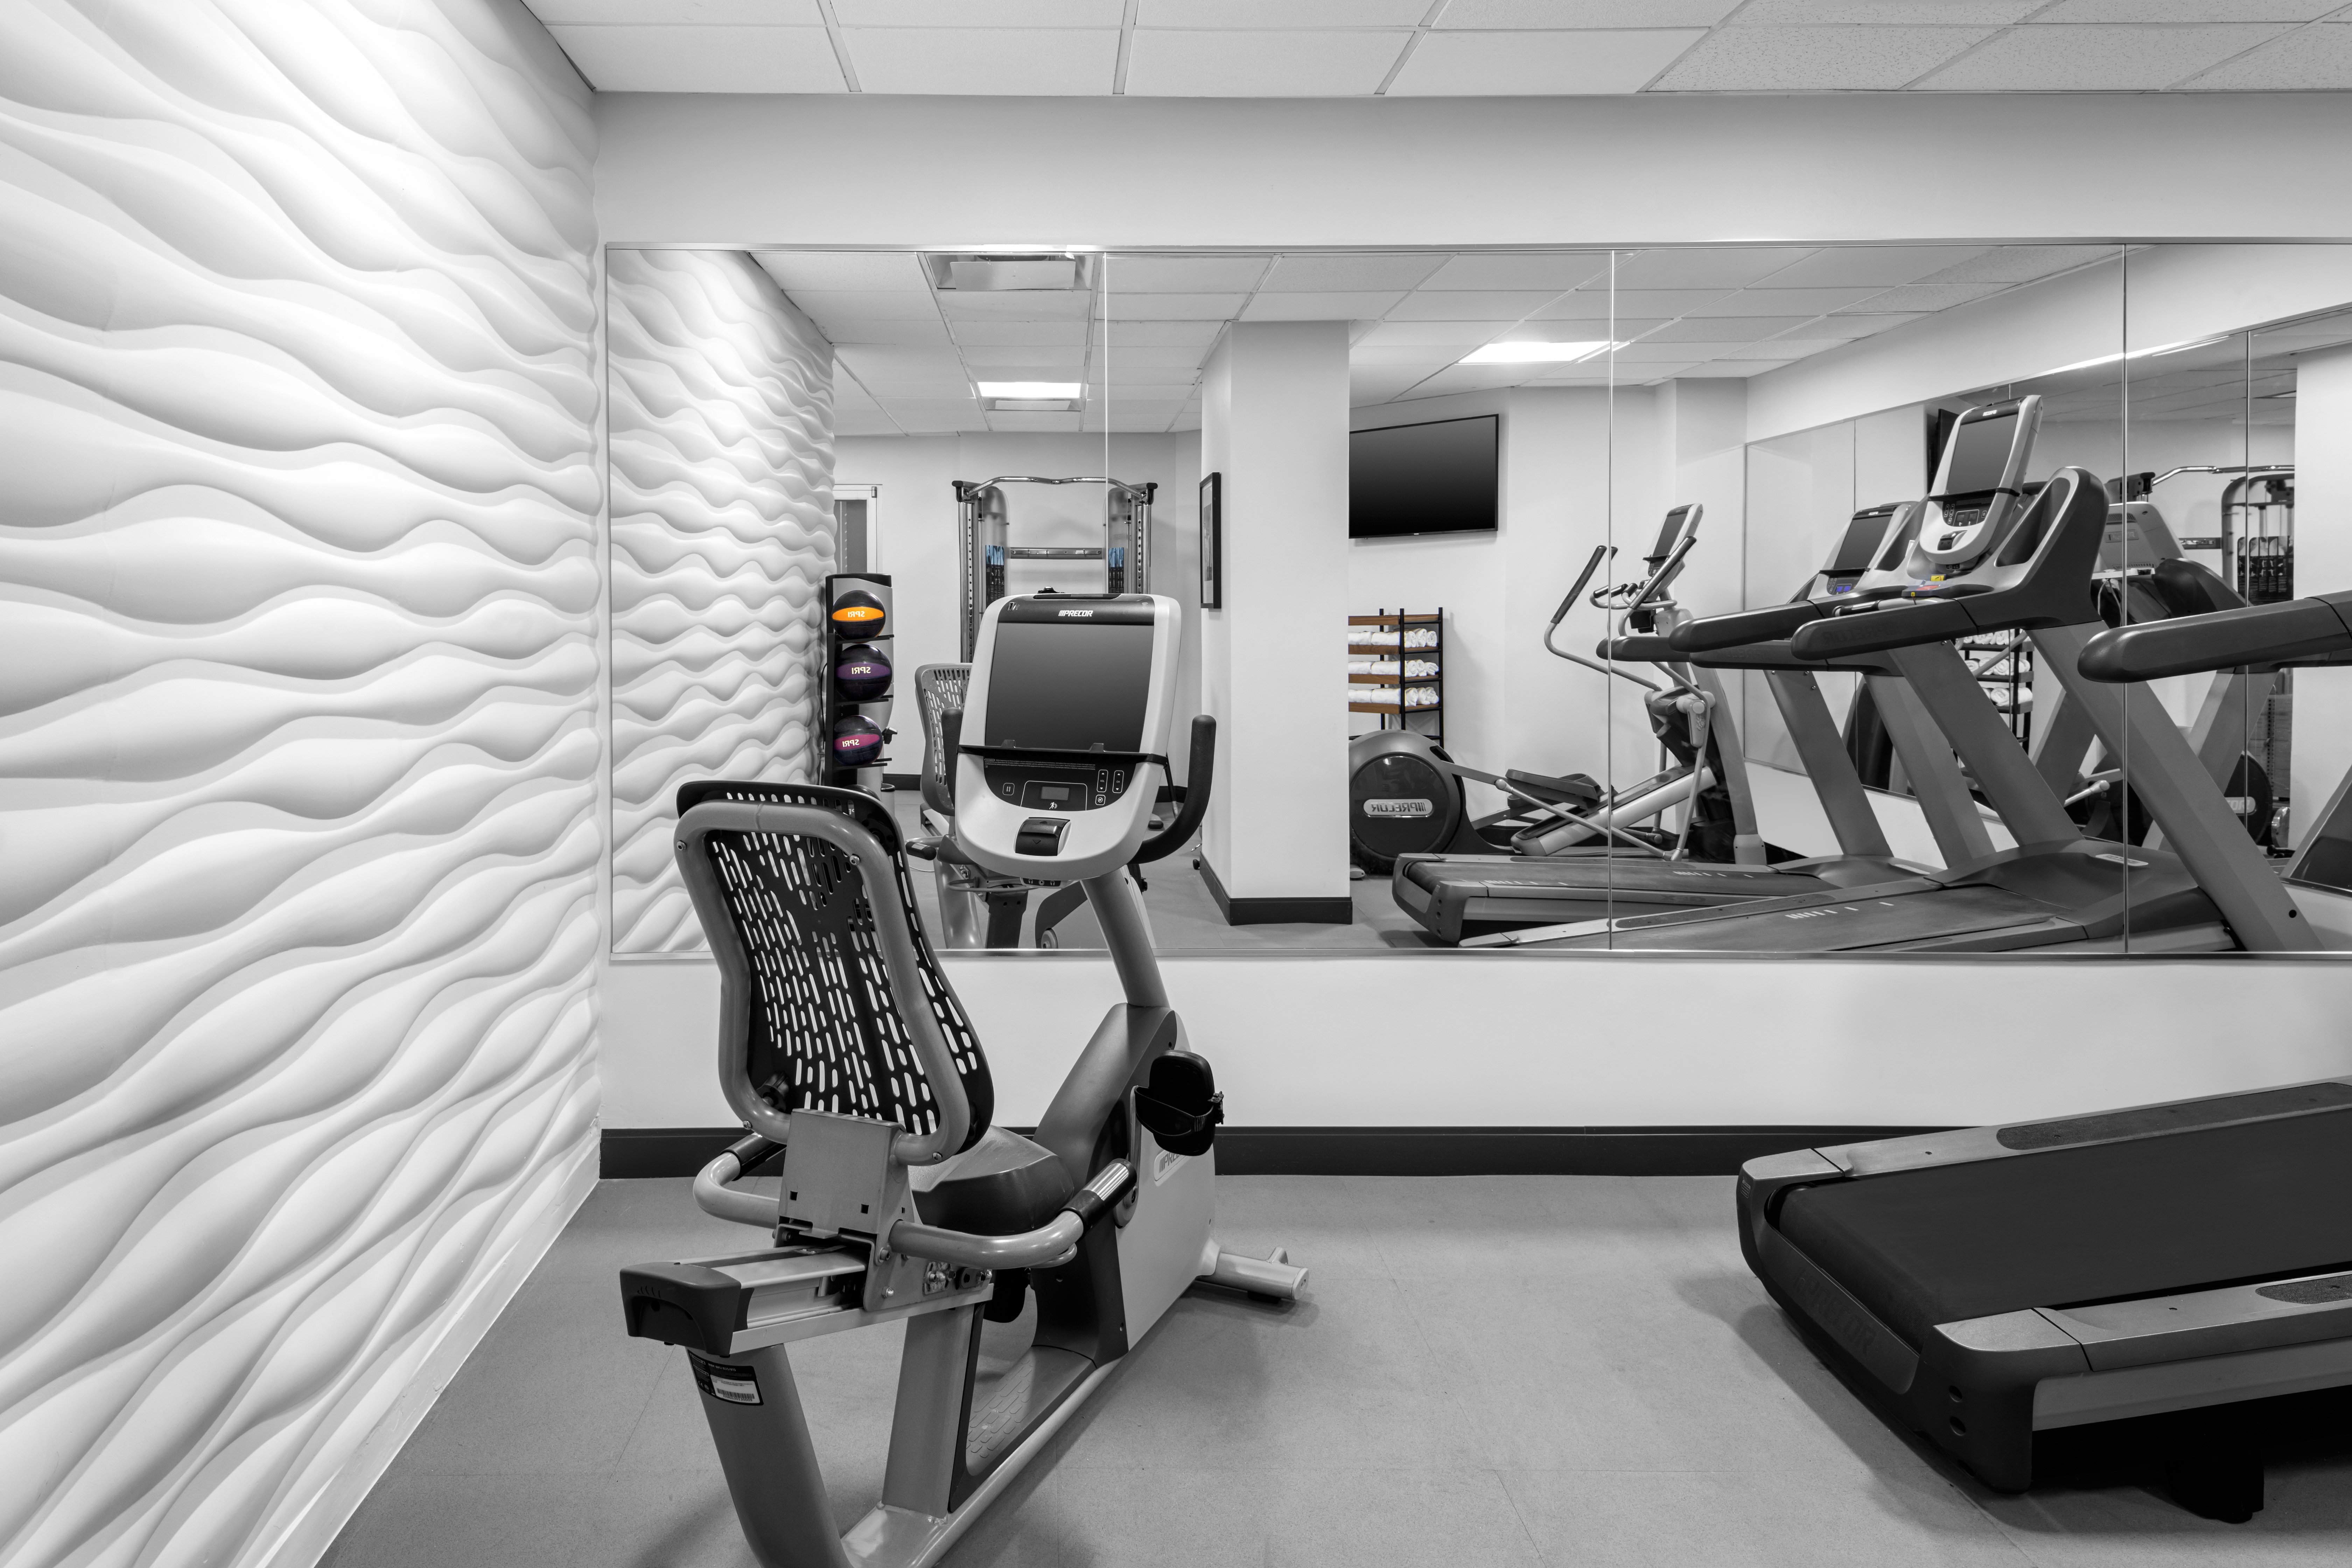 Enjoy a great workout at our new fitness center.